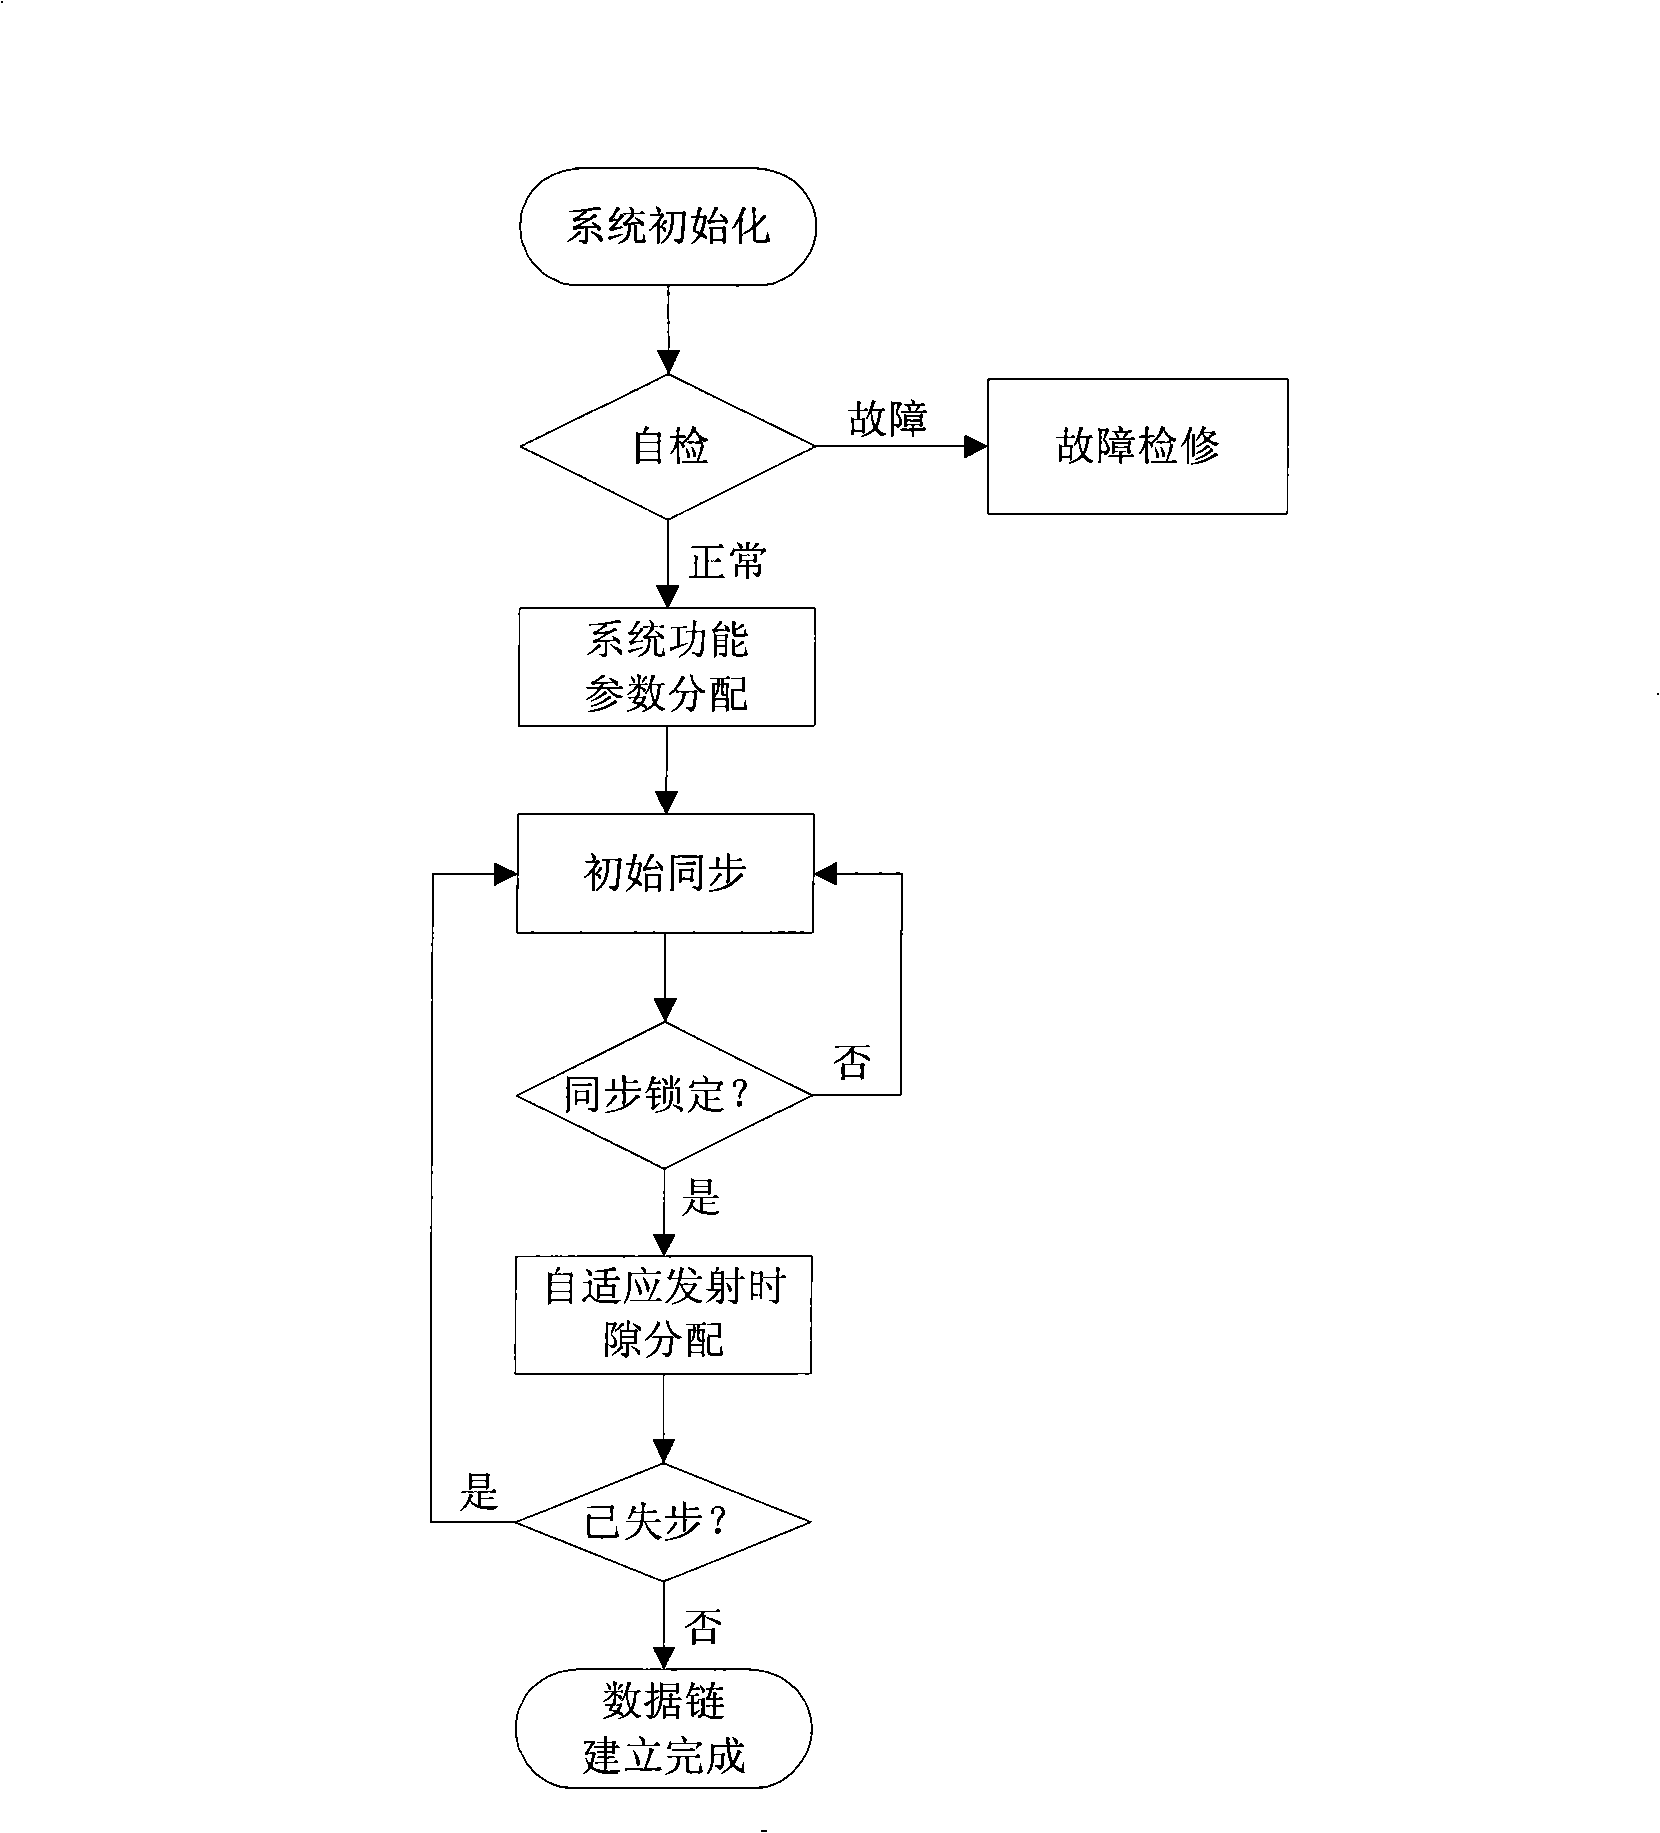 Self-synchronizing method of point-to-point communication of UAV data chaining under time division system